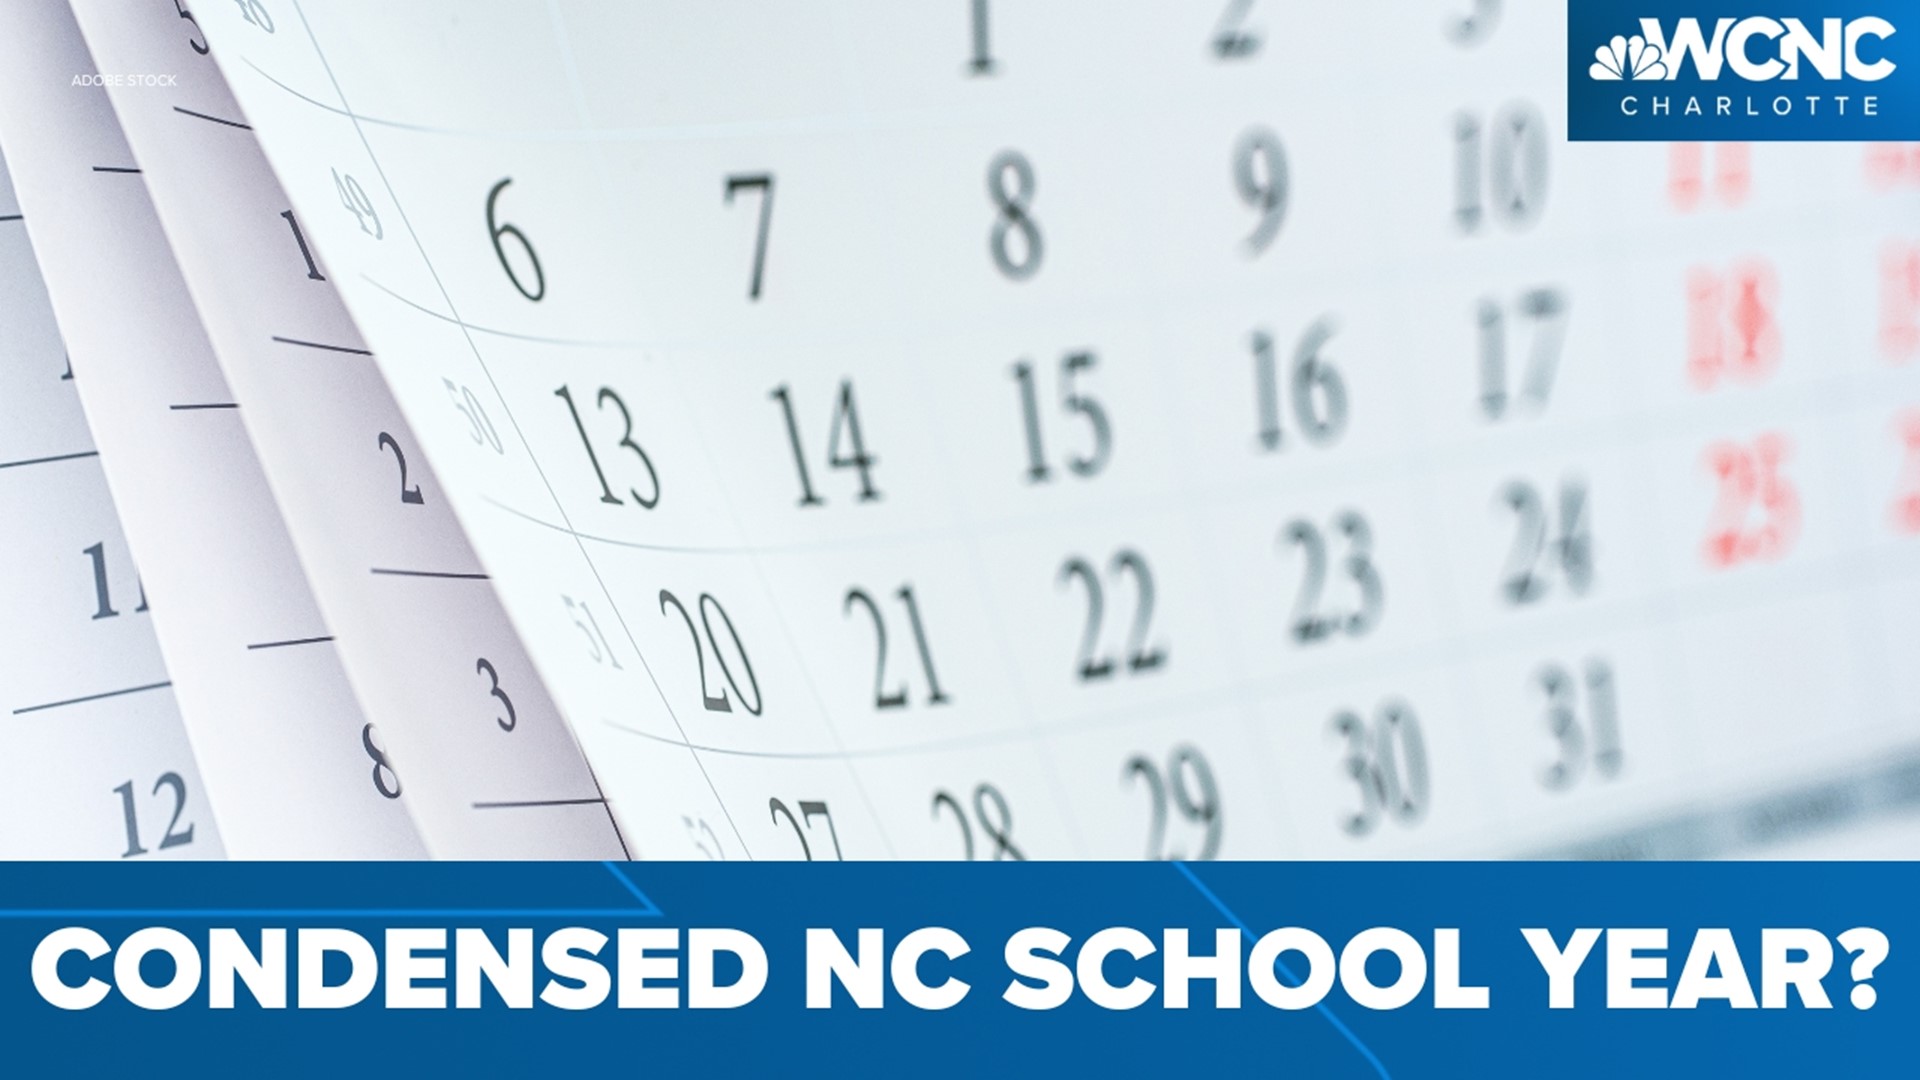 A member of the North Carolina General Assembly wants to condense the school year.